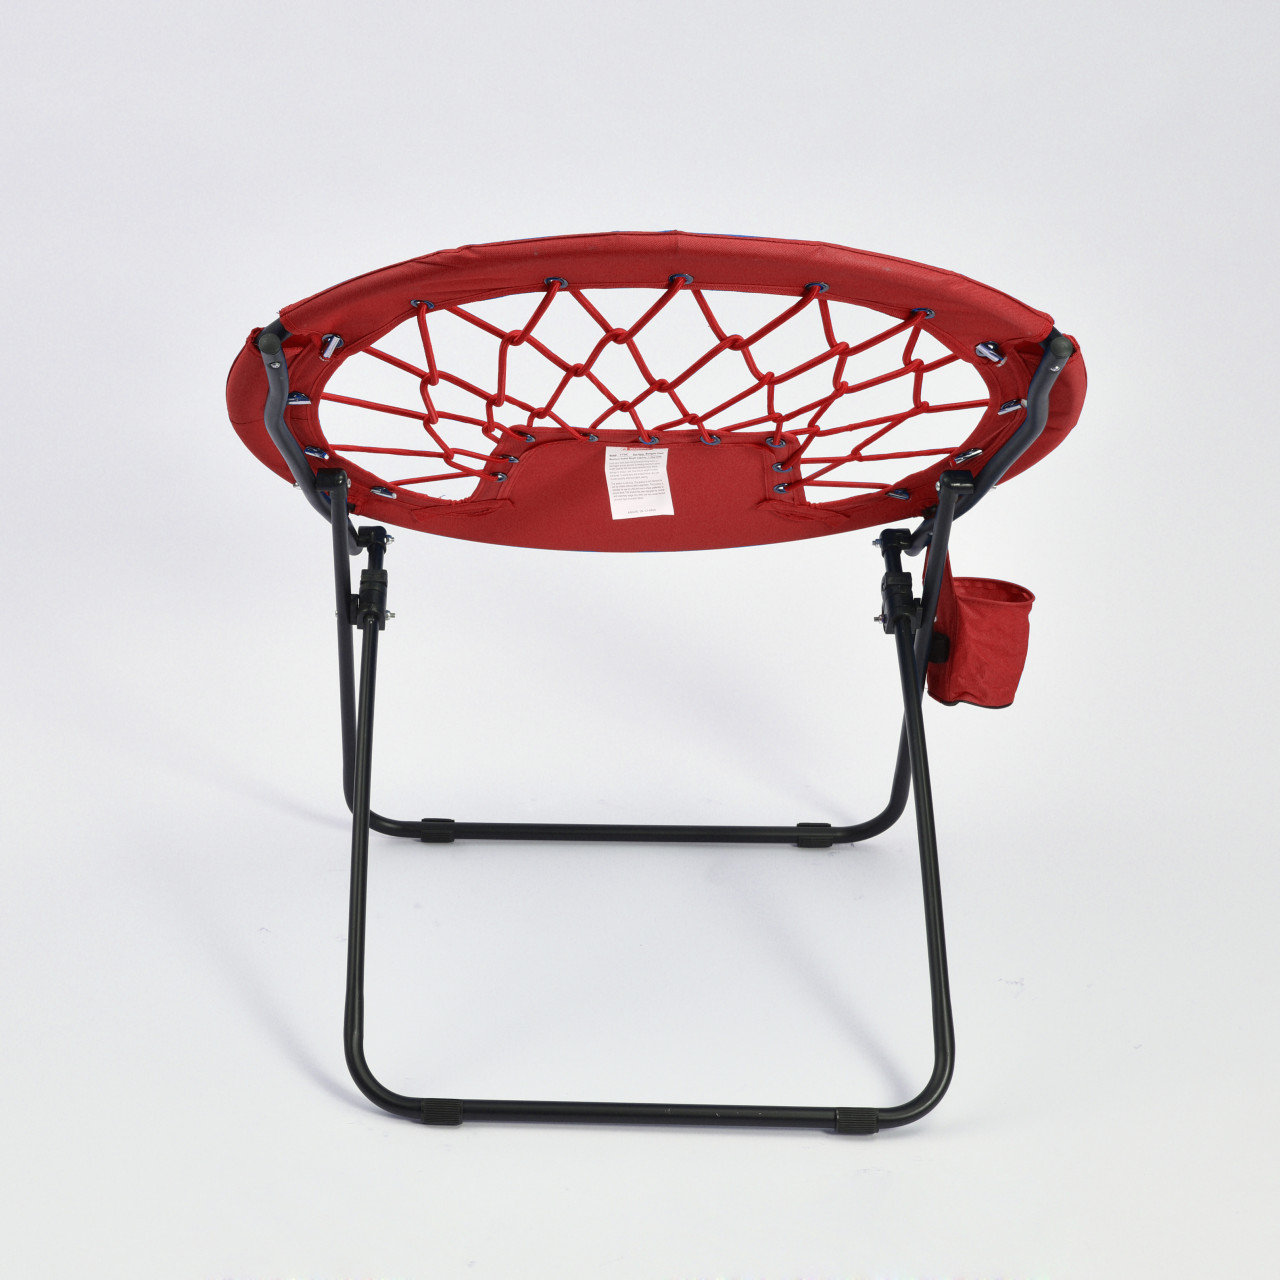 The Bungee Chair - Red | Red | The Bungee Chair | Outdoor Living ...